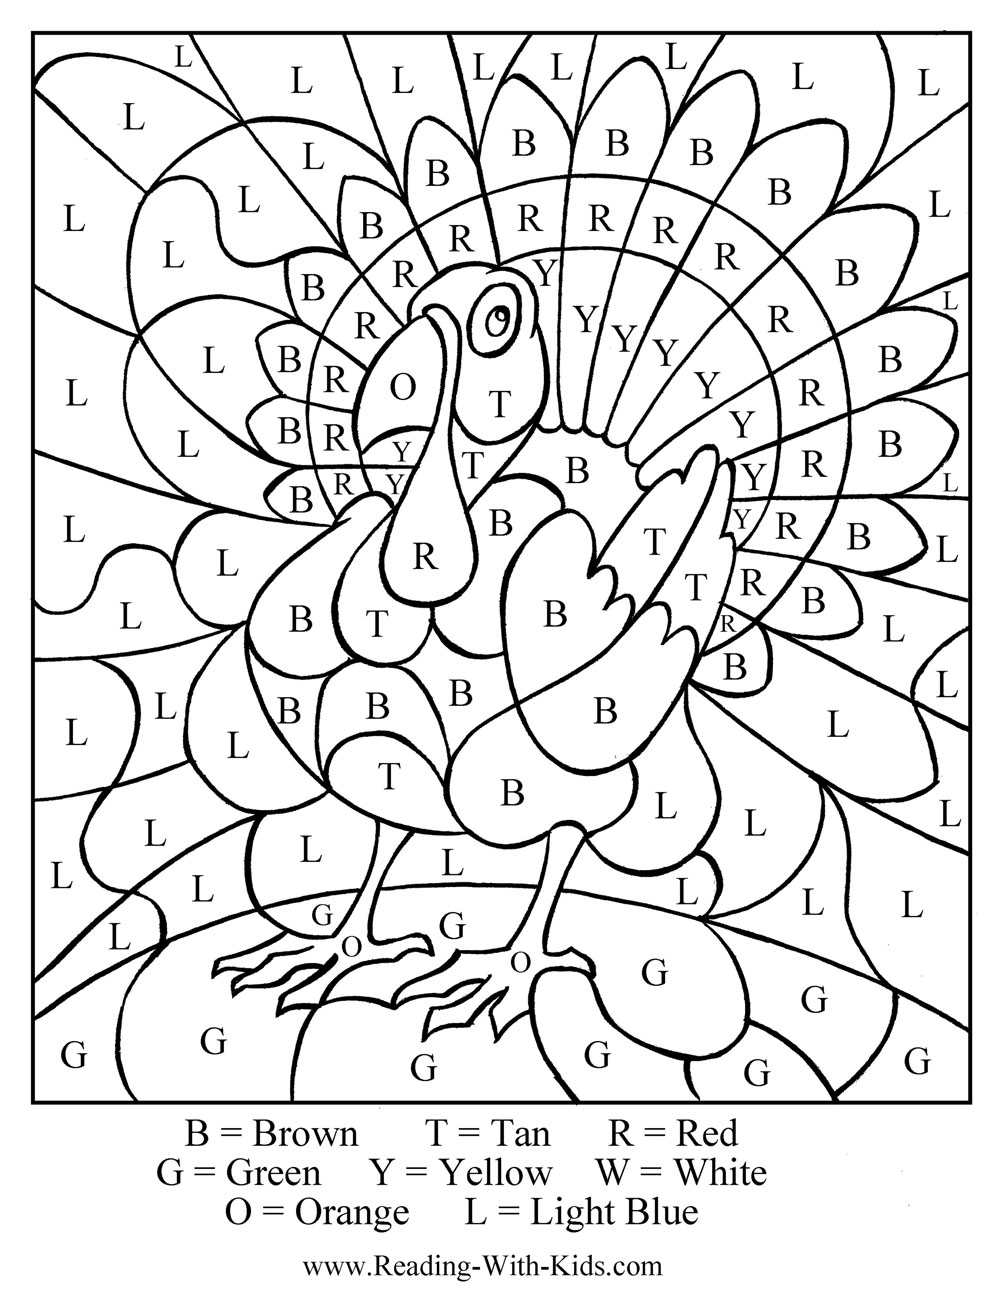 20 FREE Thanksgiving Coloring Pages For Kids & Adults   So Festive